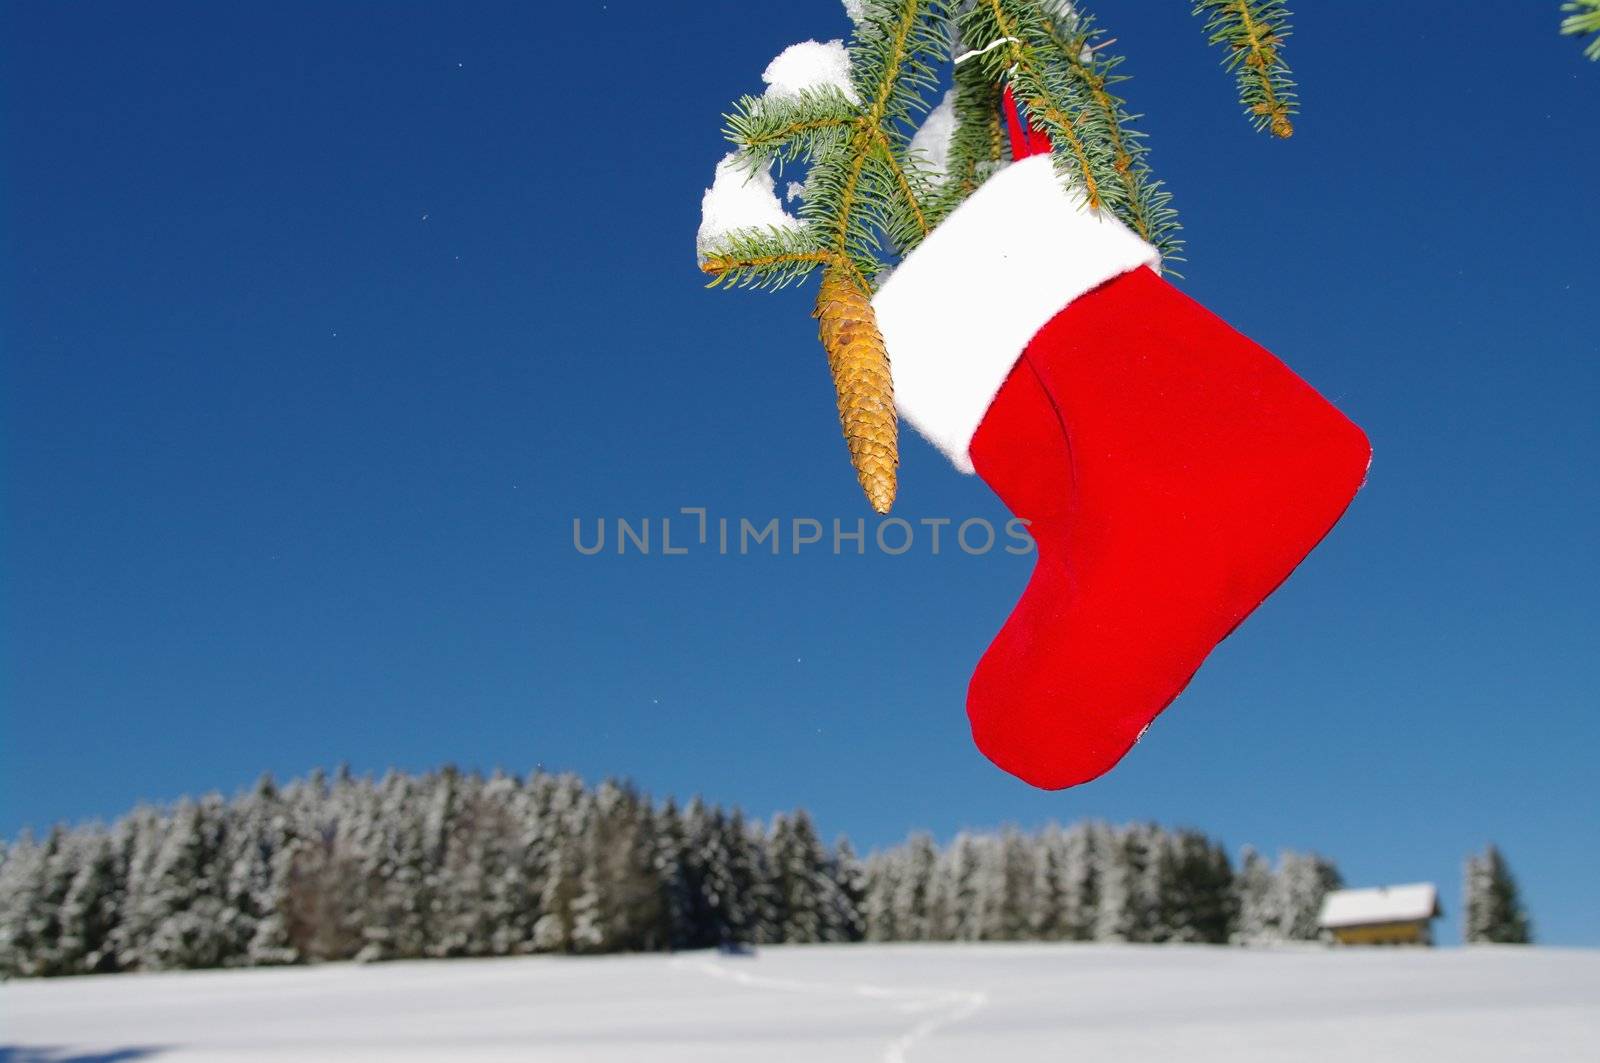 Santa Claus Christmas boot for gifts outside in a snowy landscape